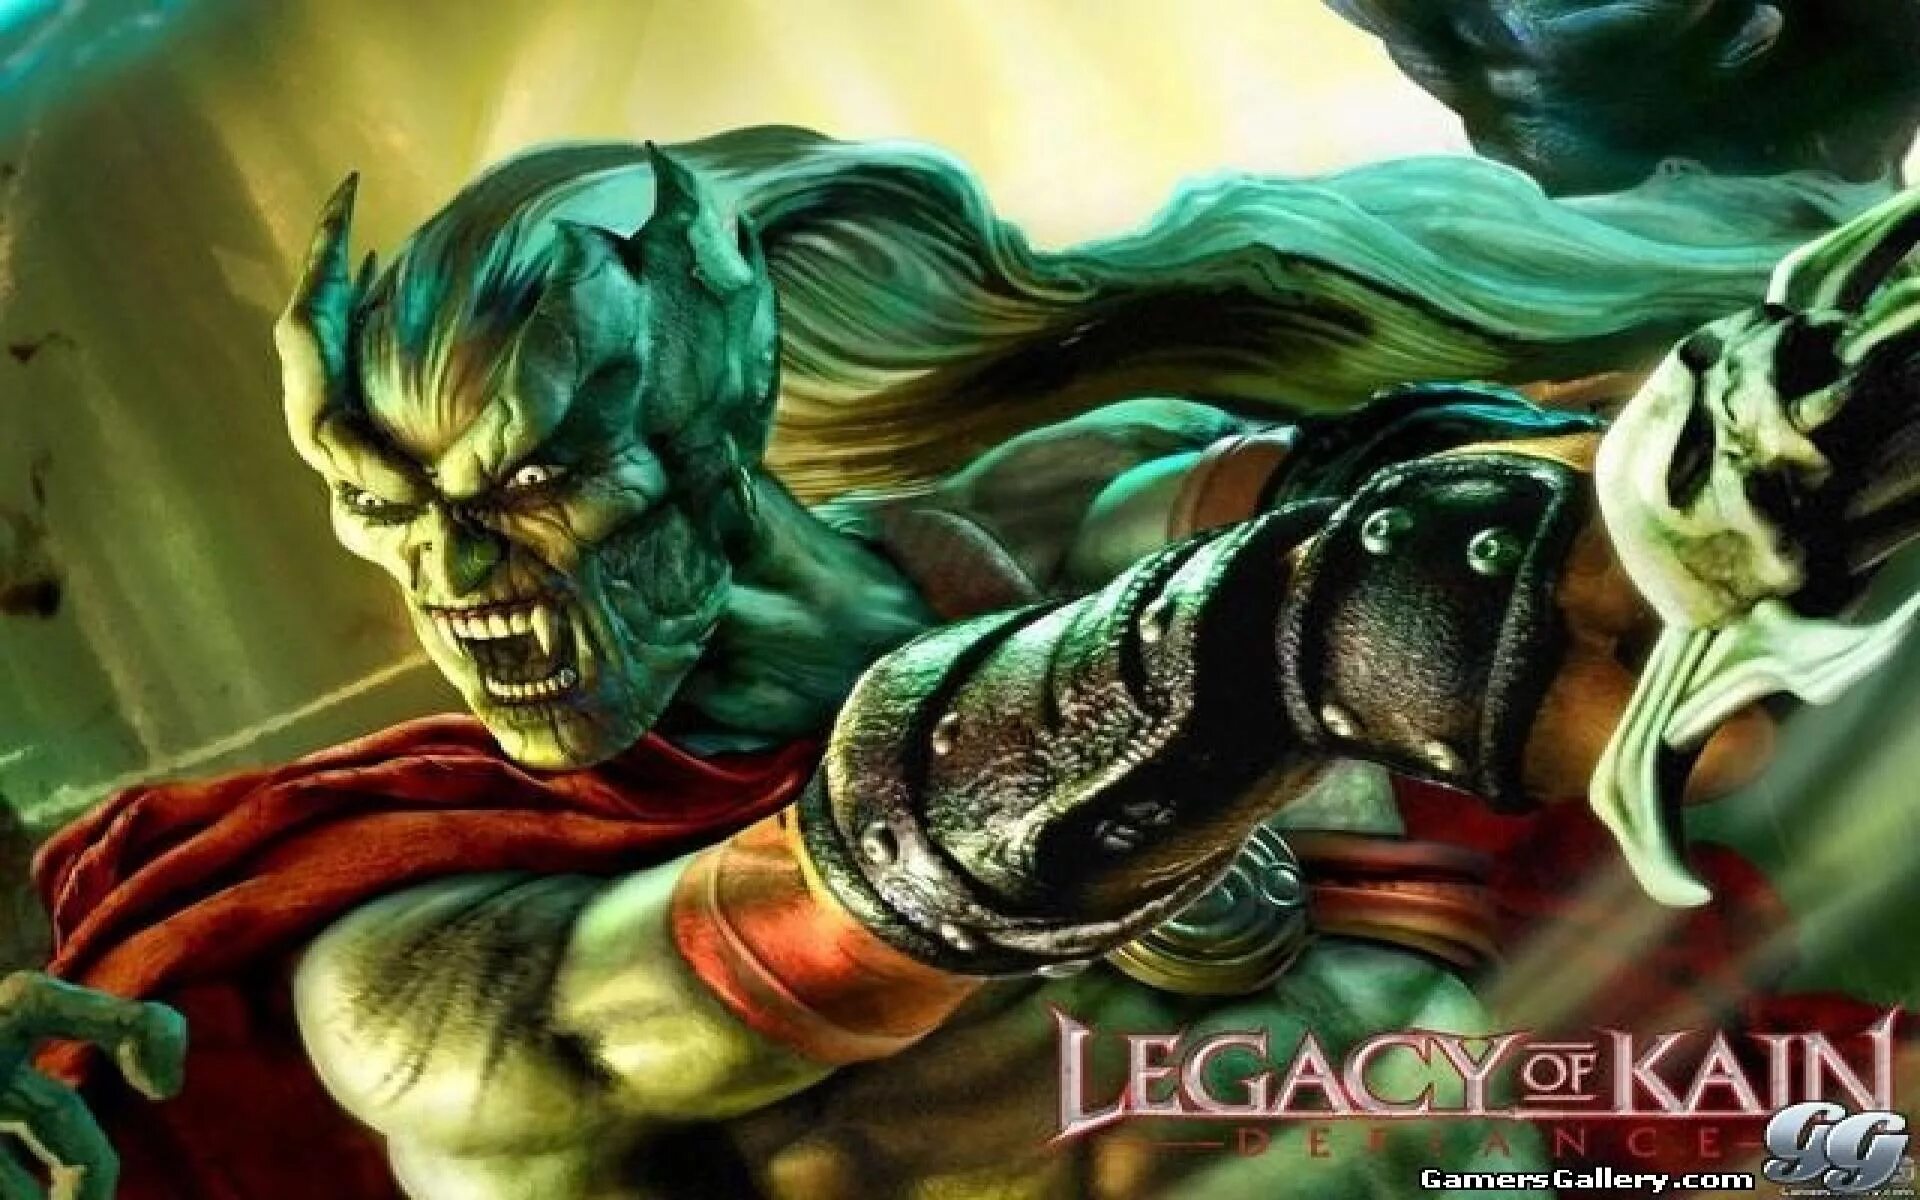 Legacy of Kain Kain. Наследие Каина. Defiance. Legacy of Kain Art.